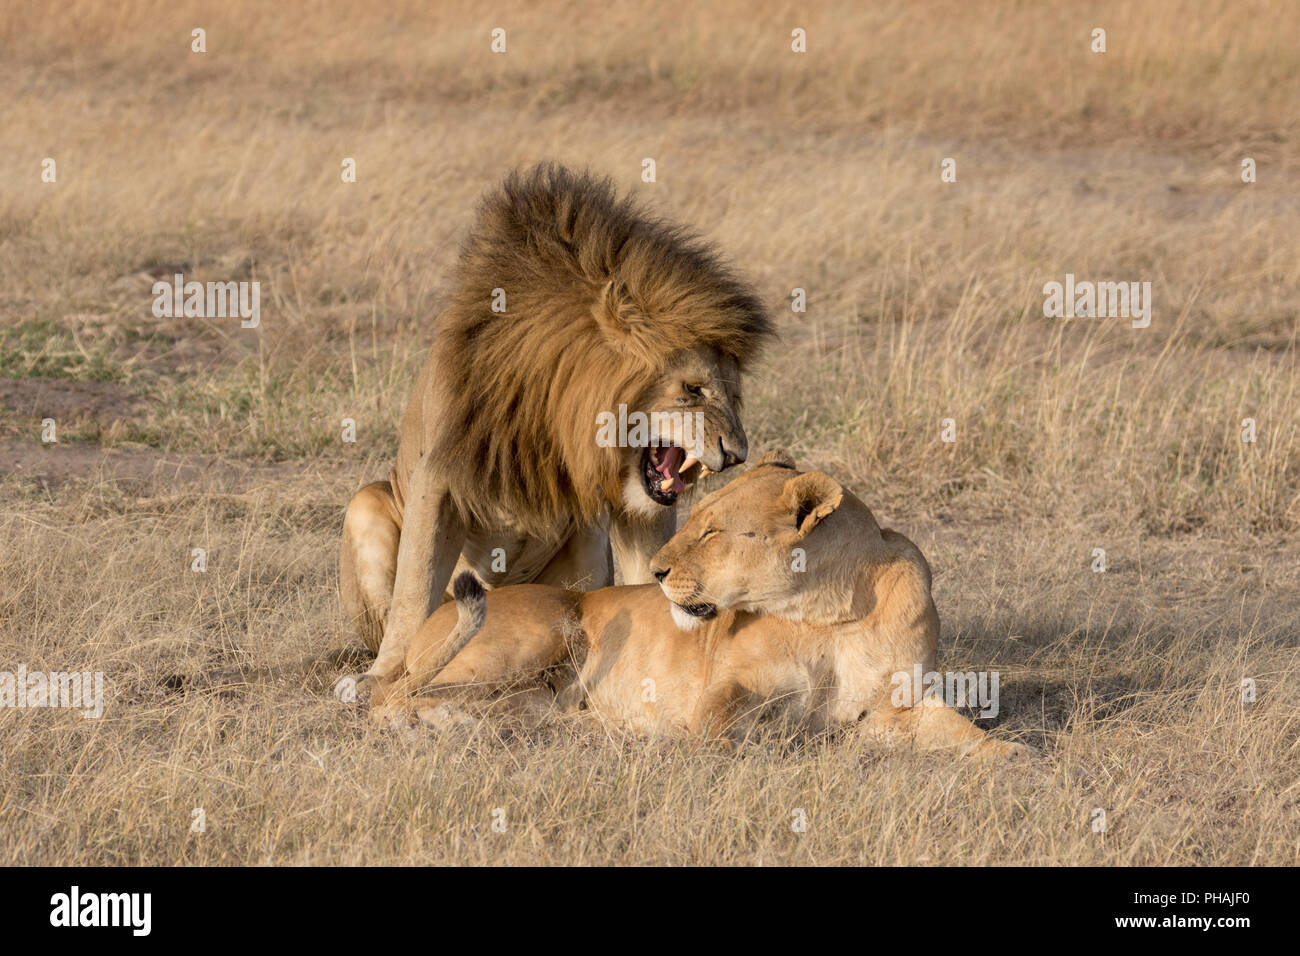 Male lion telling the lioness that it is time for mating Stock Photo